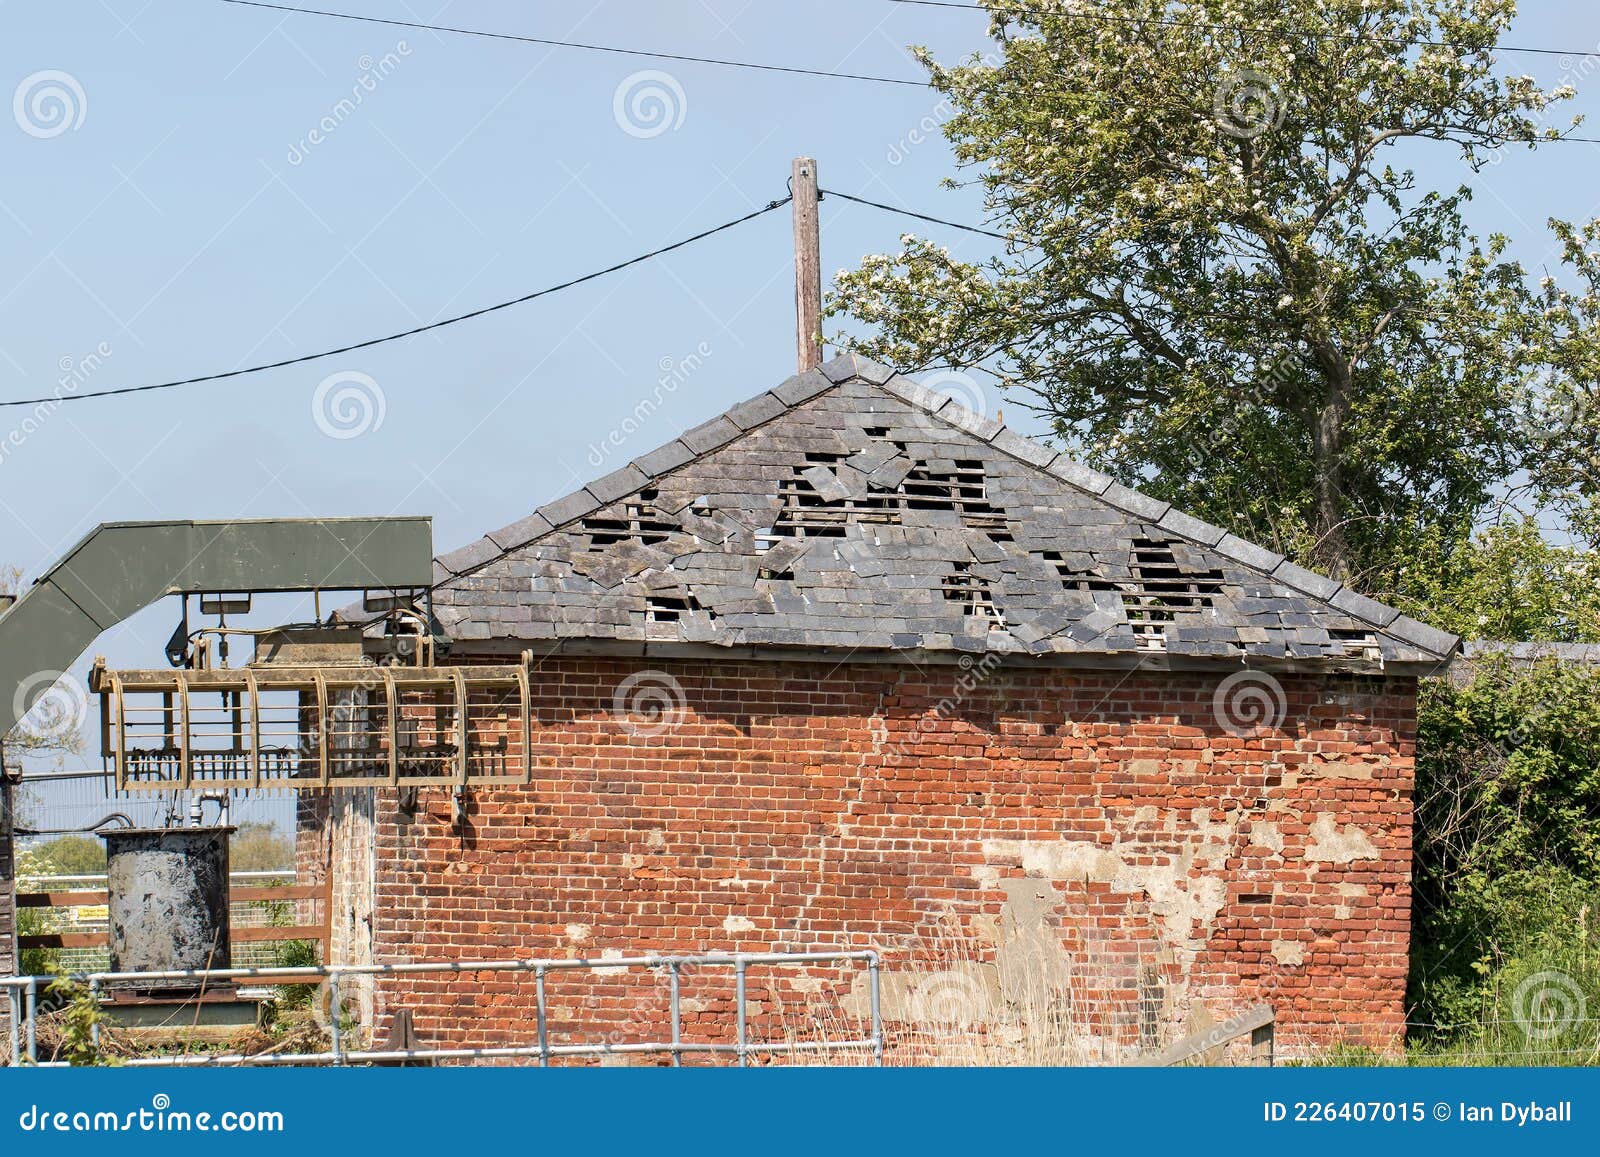 Fall Off Roof Stock Photos - 595 Images